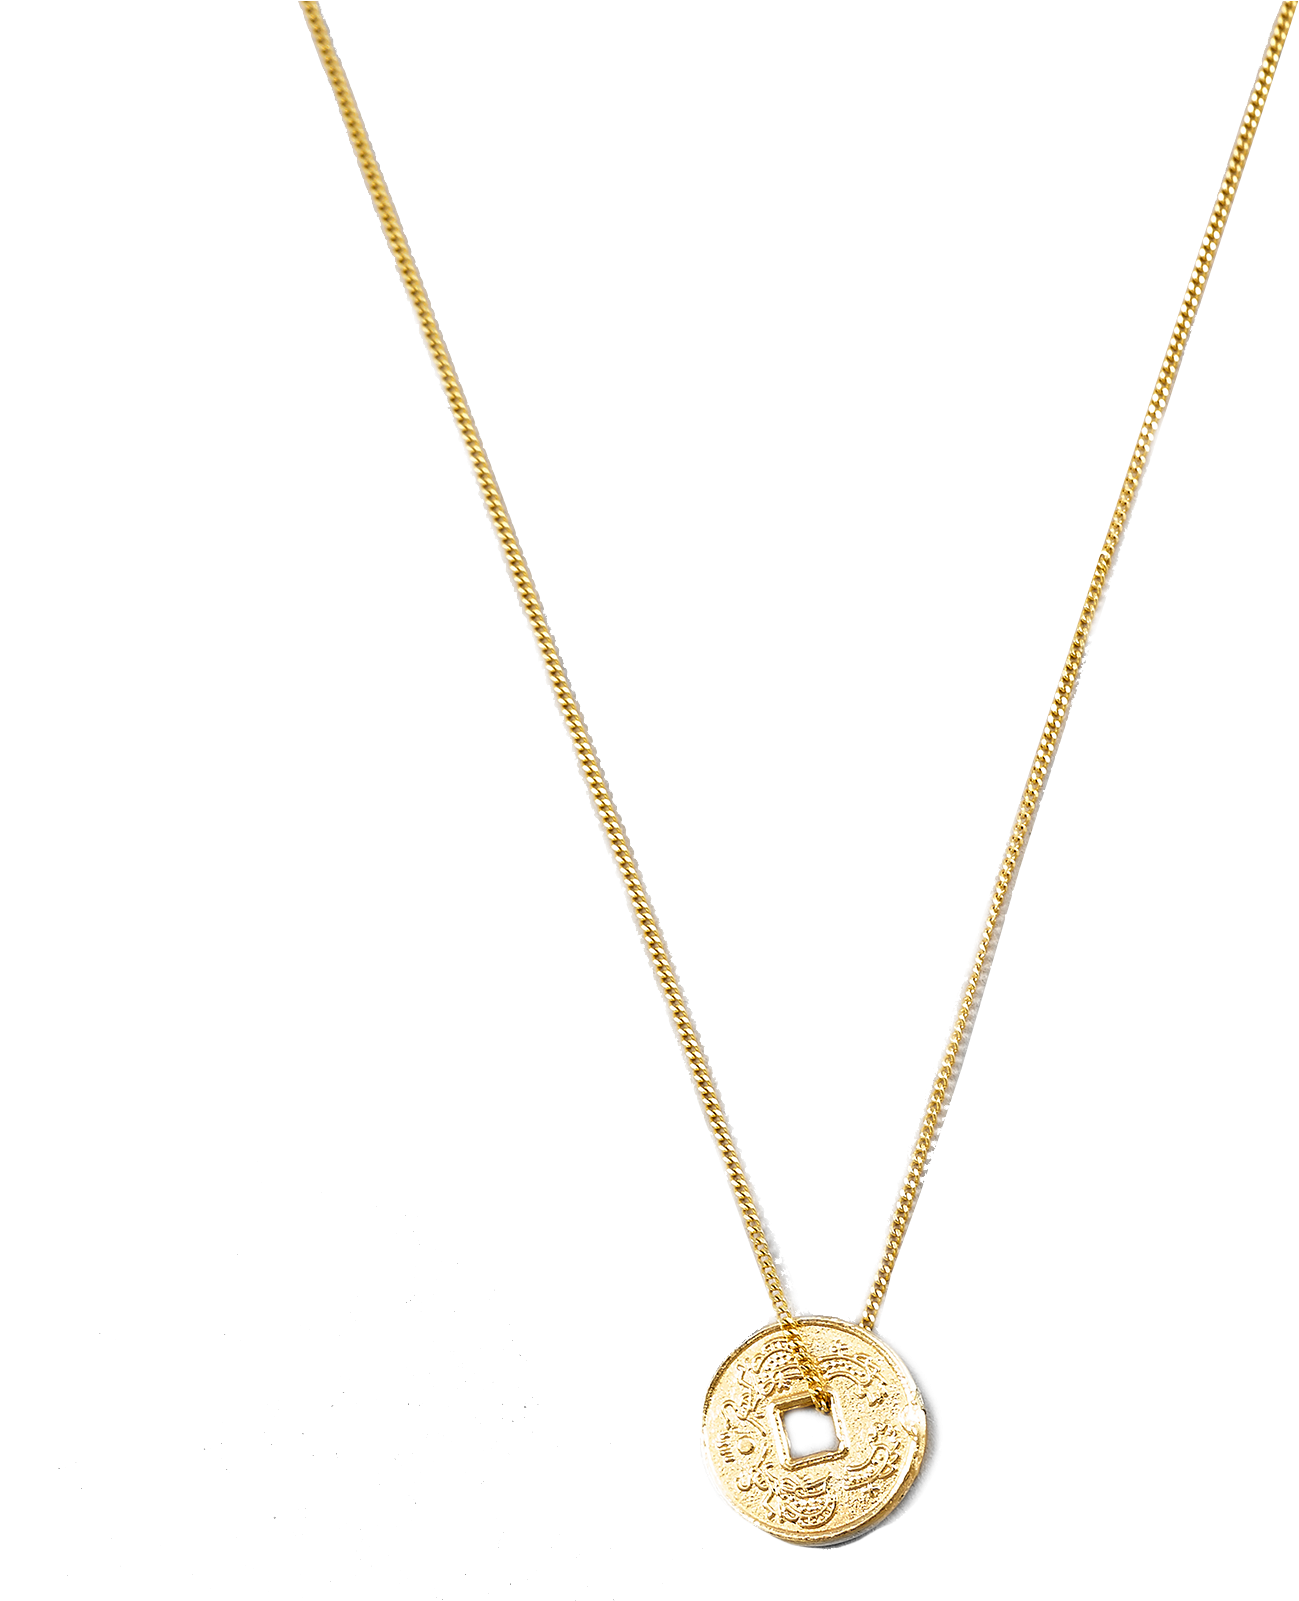 A Gold Necklace With A Circle On It